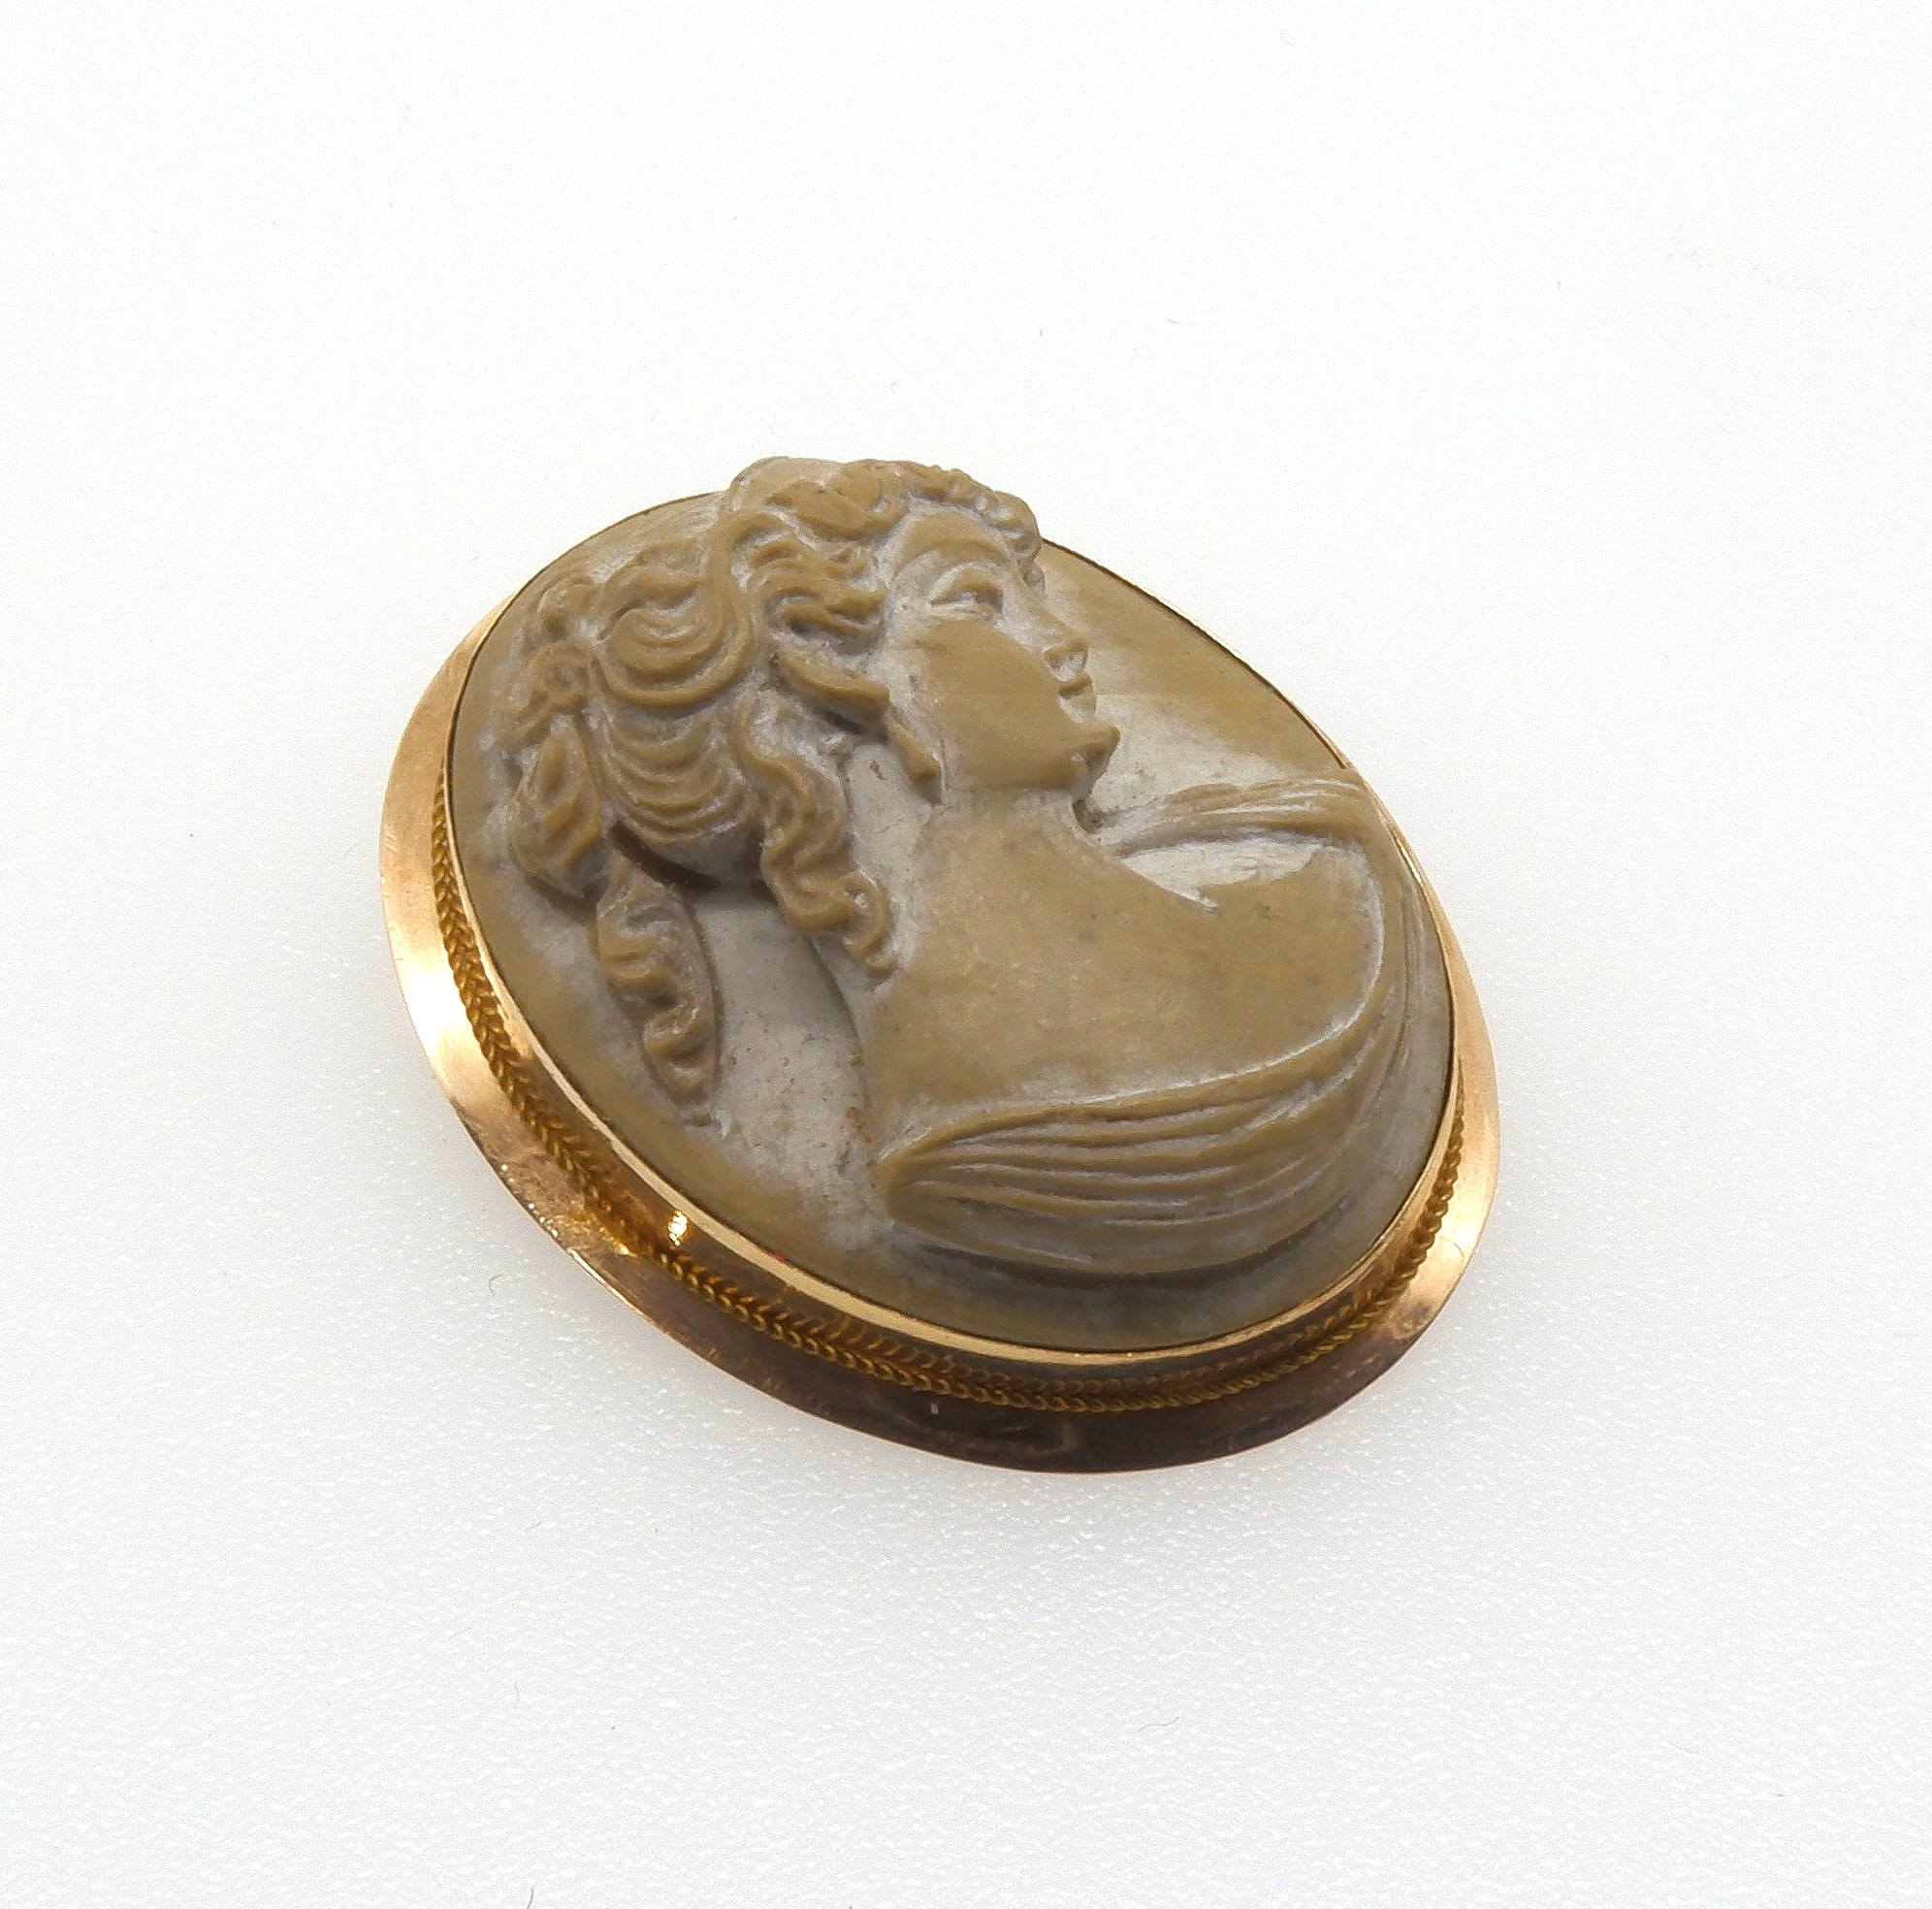 '14ct Yellow Gold Pumice Stone Cameo Brooch'